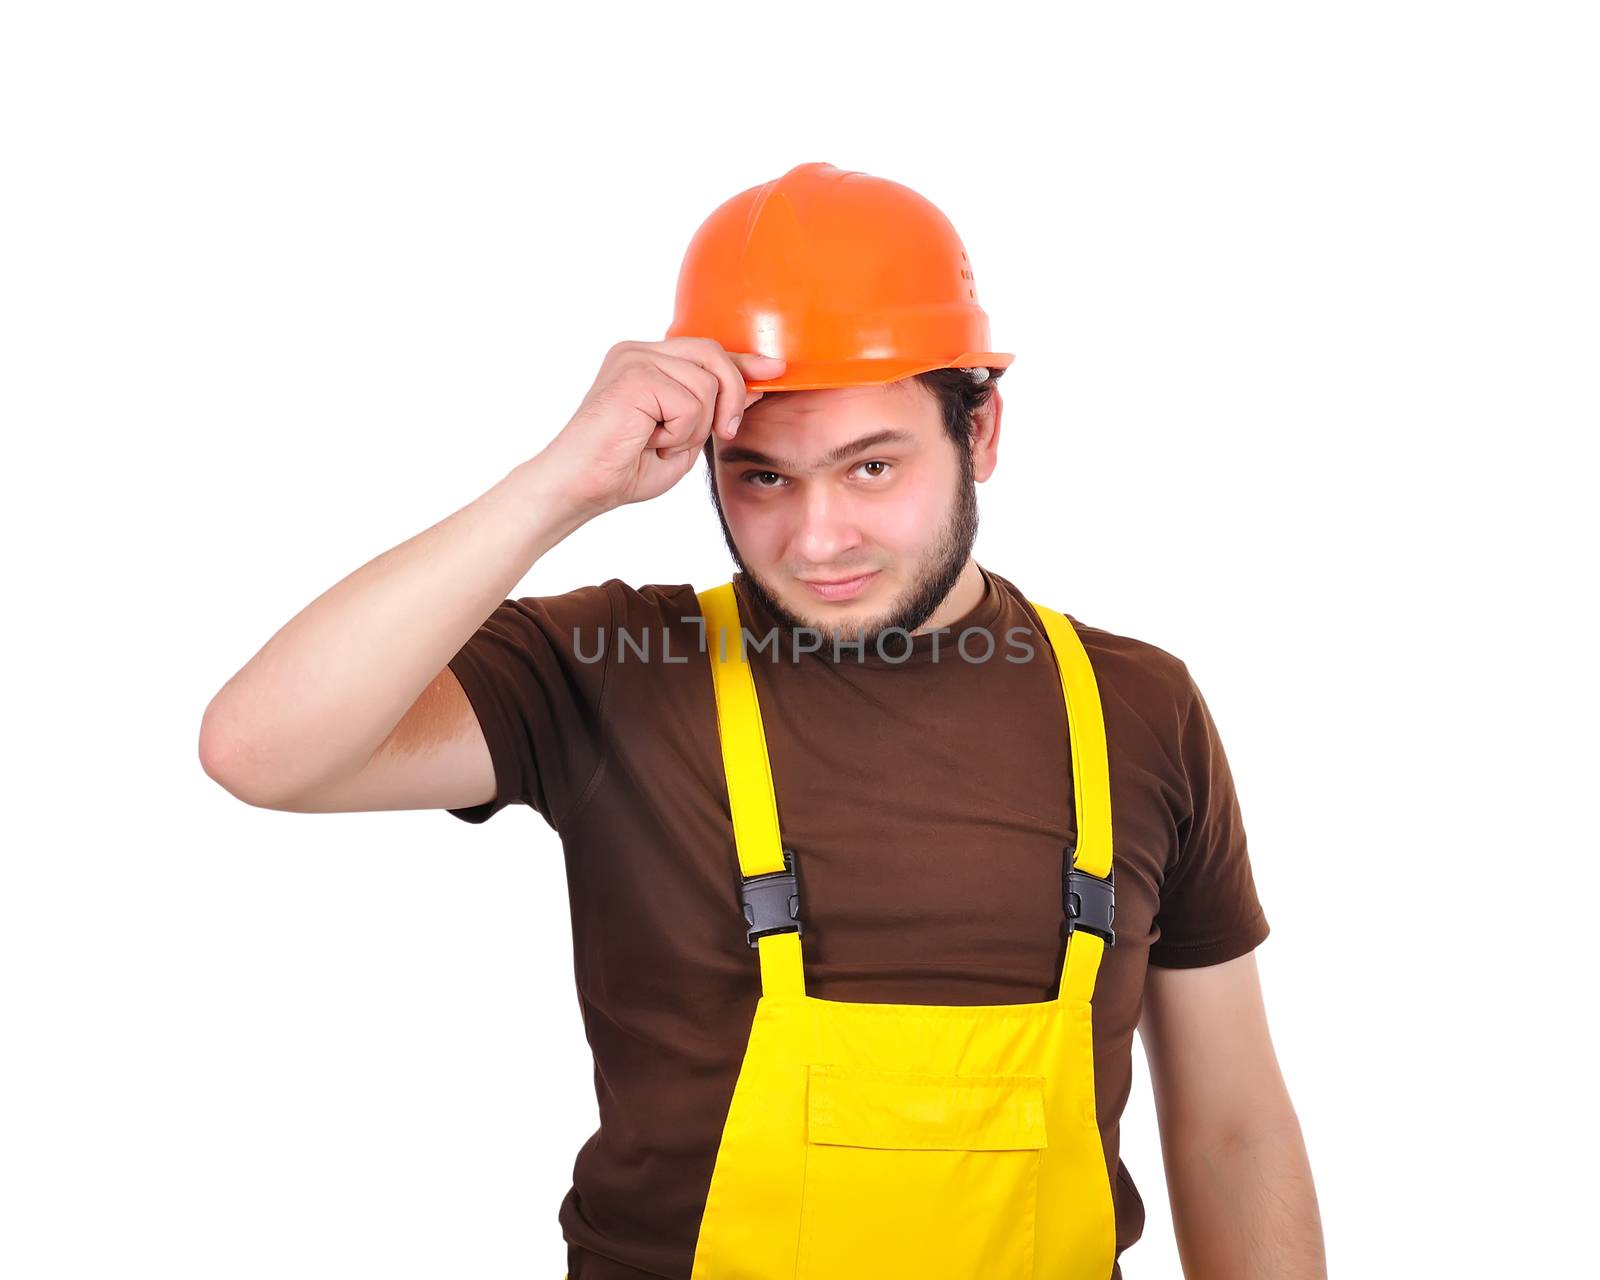 builder with helmet on a white background